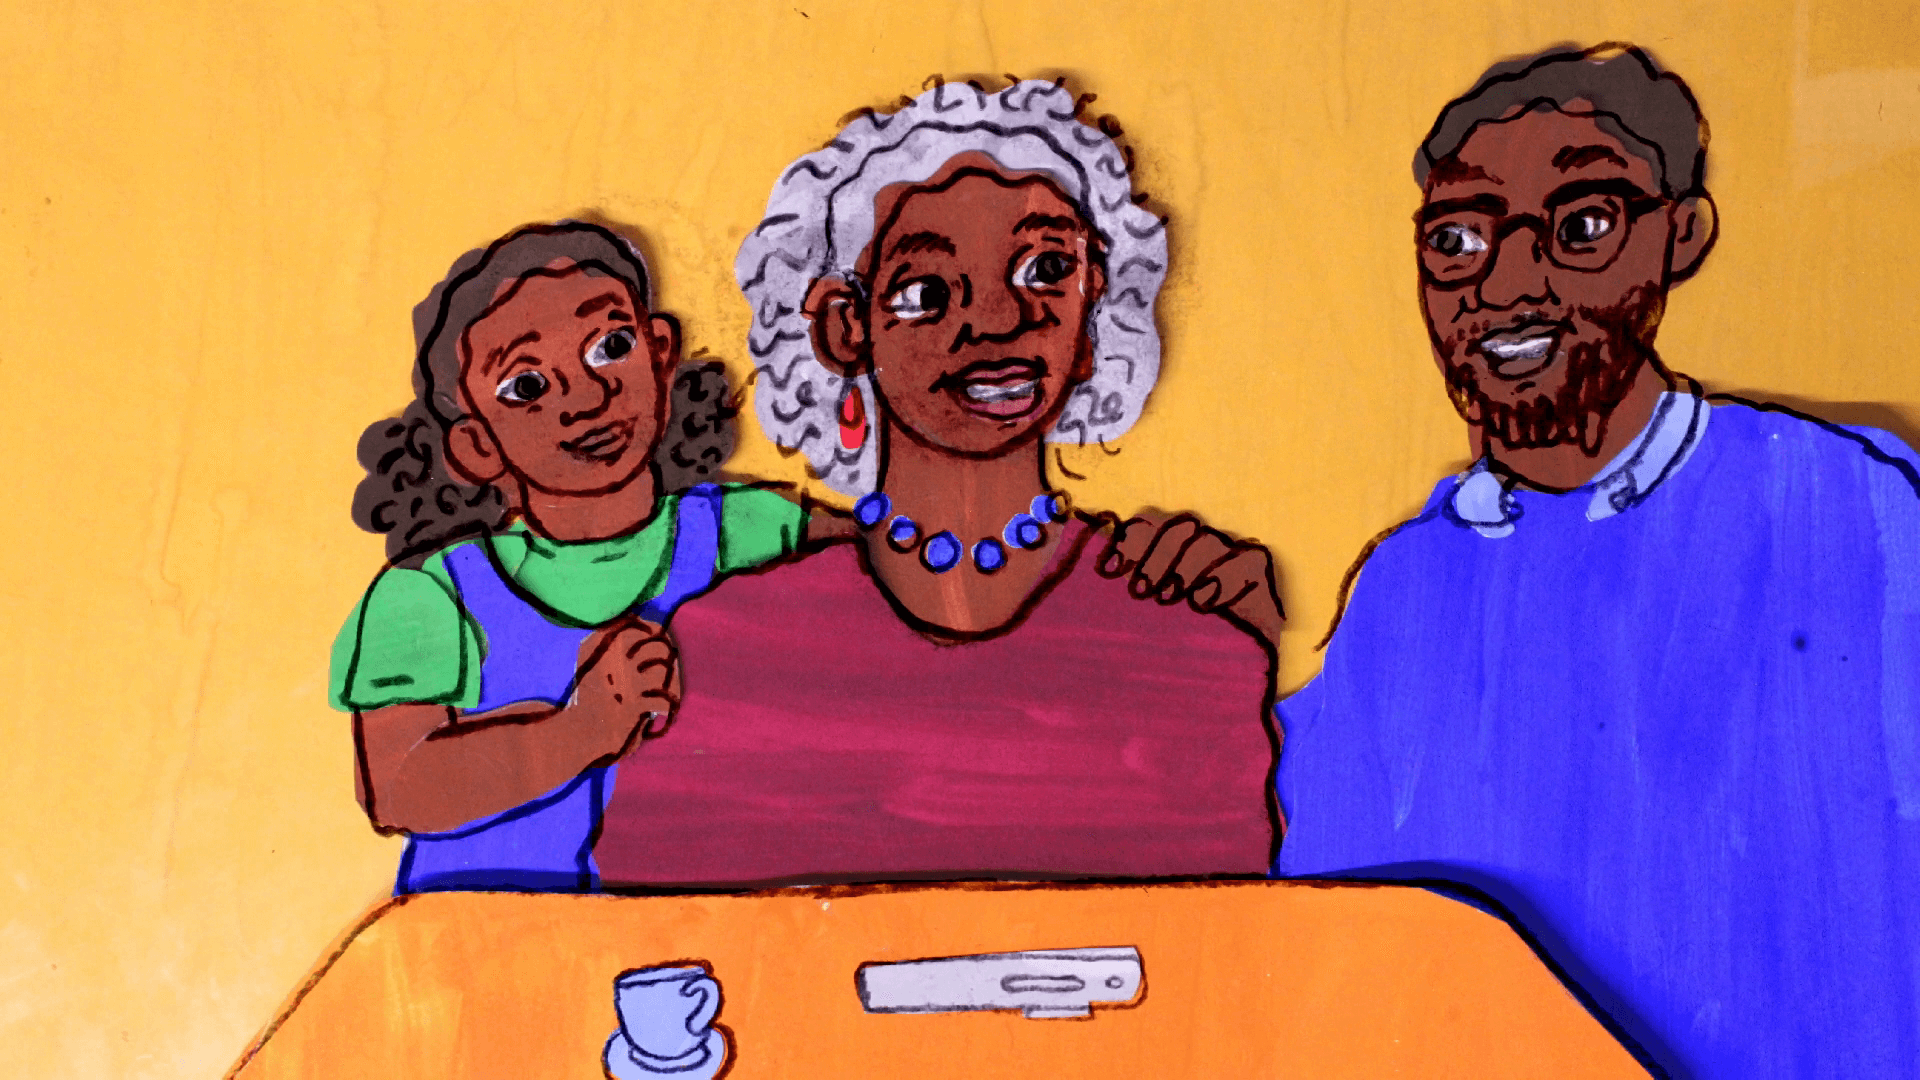 Illustration of child, older woman and man at table, all smiling